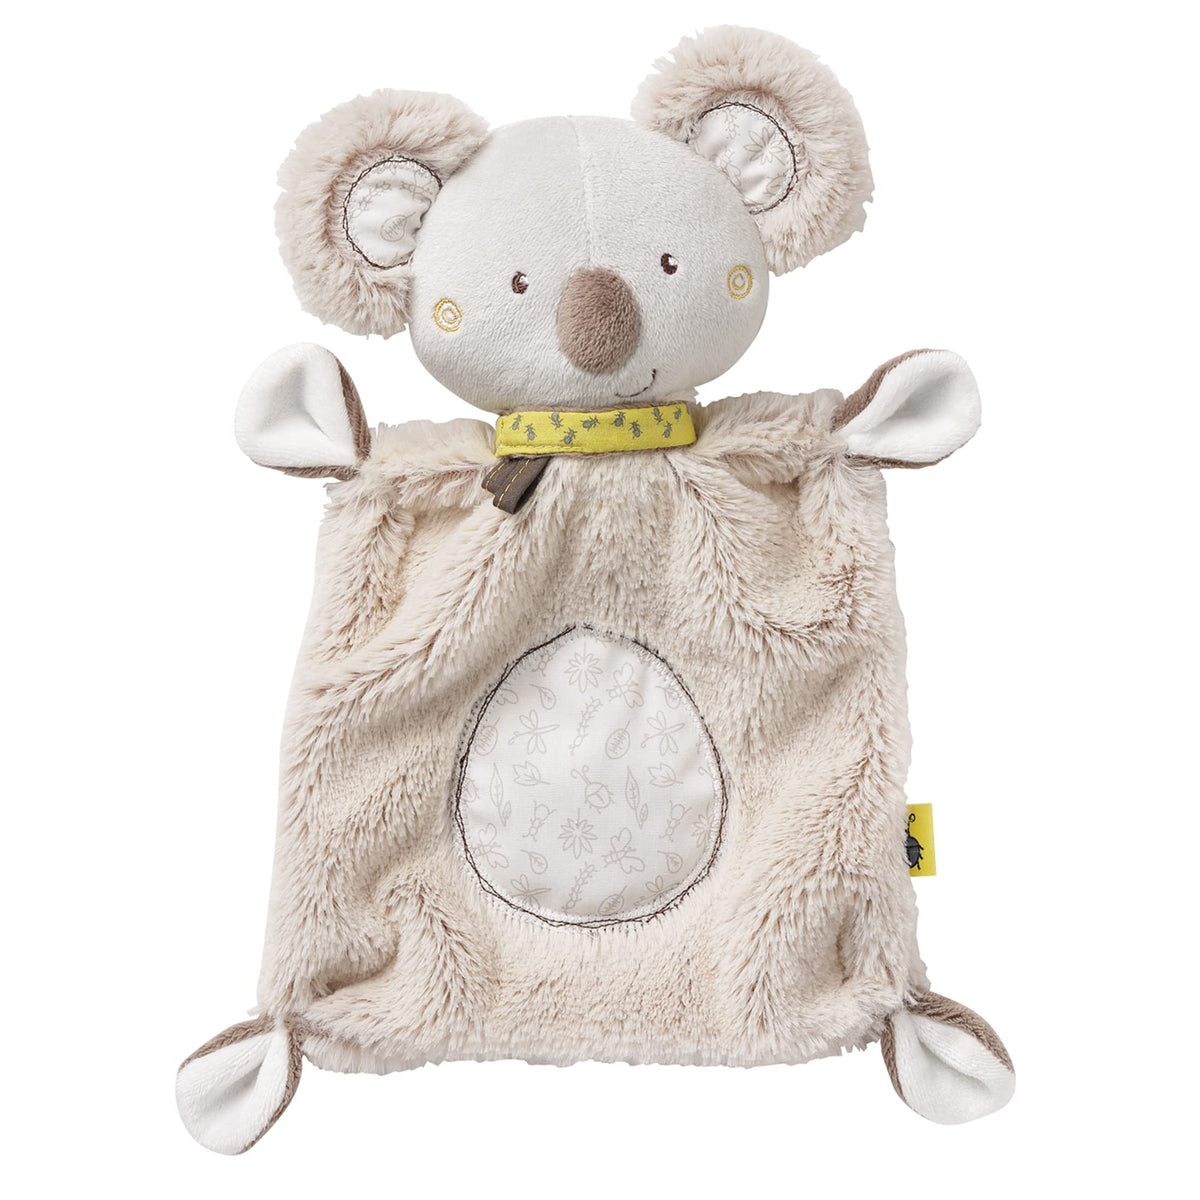 Fehn 064056 Koala Comforting Blanket - Comforter with Little Koala Head - for Snuggling for Babies and Toddlers from Newborns Upwards - Dimensions : 27 cm